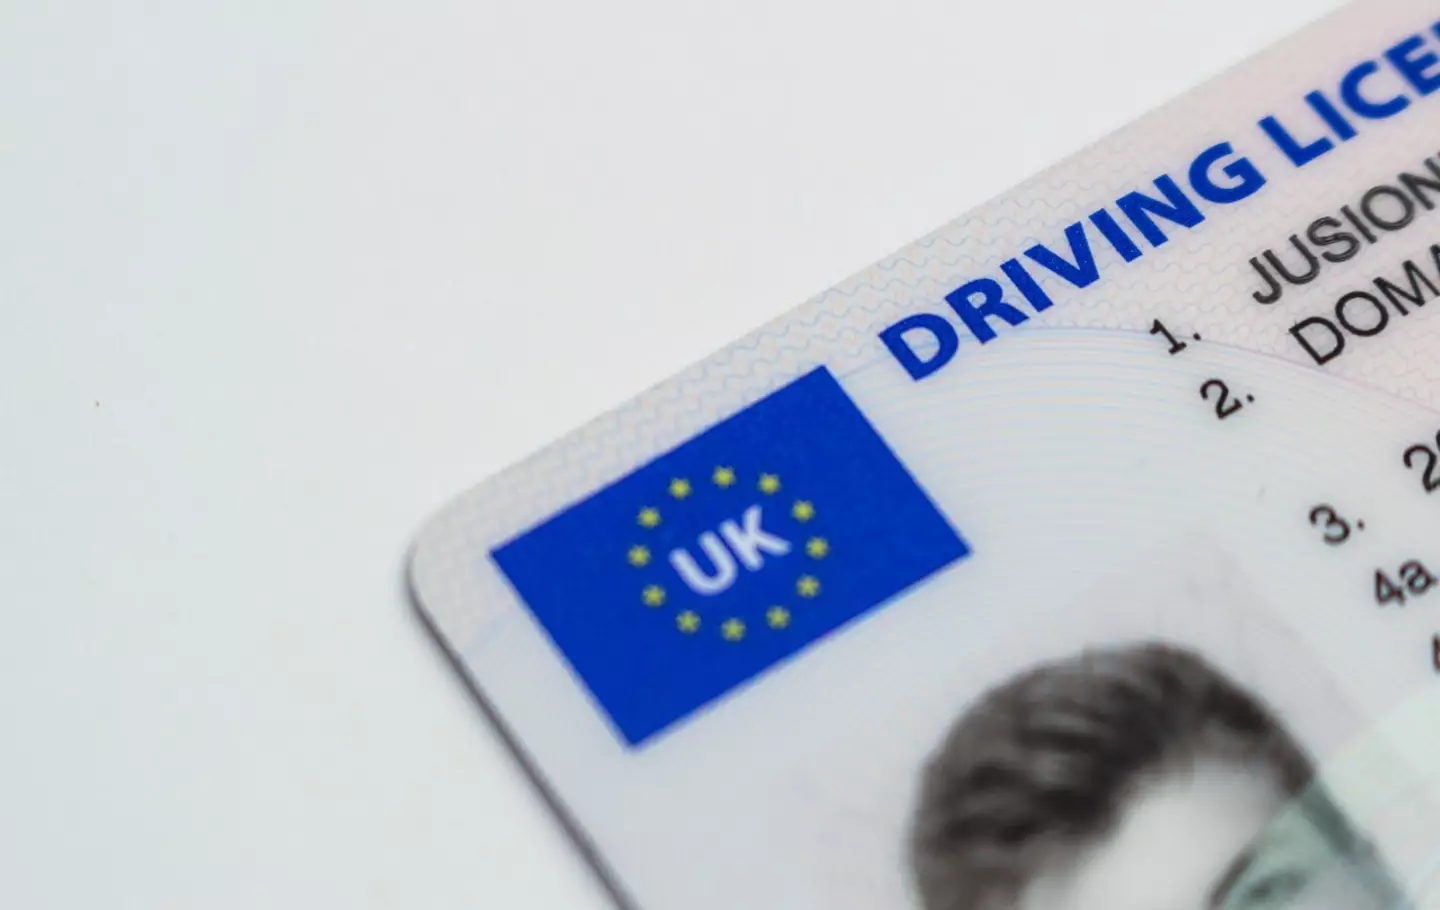 The Money Saving Expert has recently issued an important warning to anyone who passed their driving test before 2014.